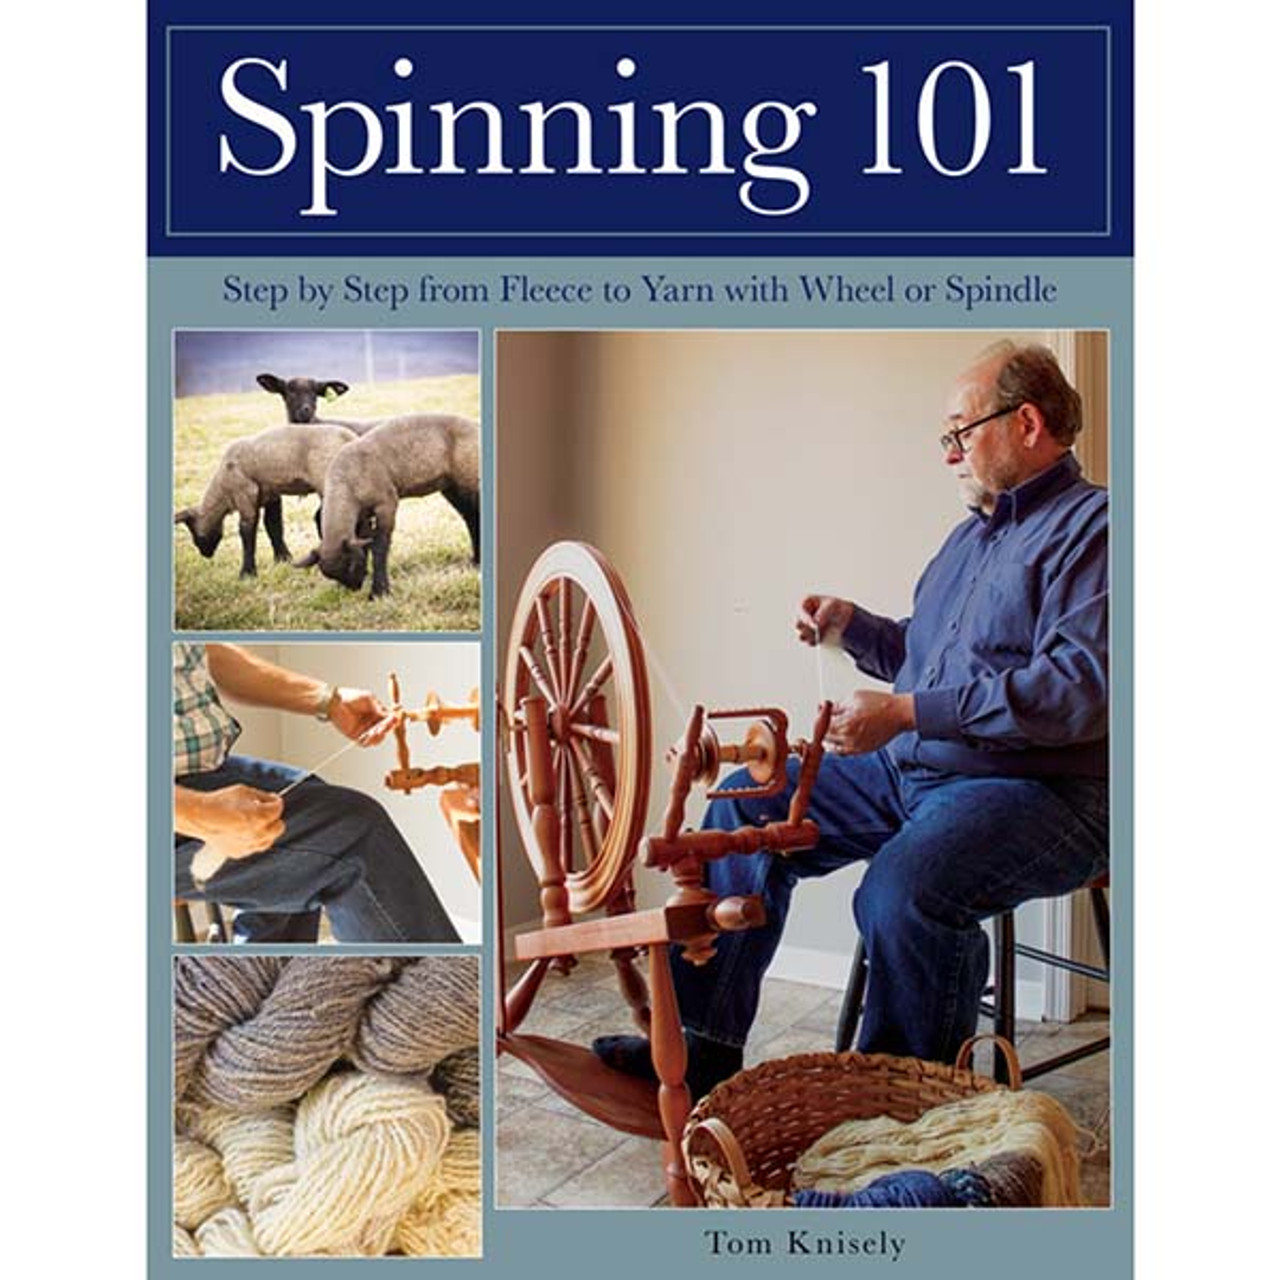 Learning How to Spin Yarn: Spindle vs Wheel